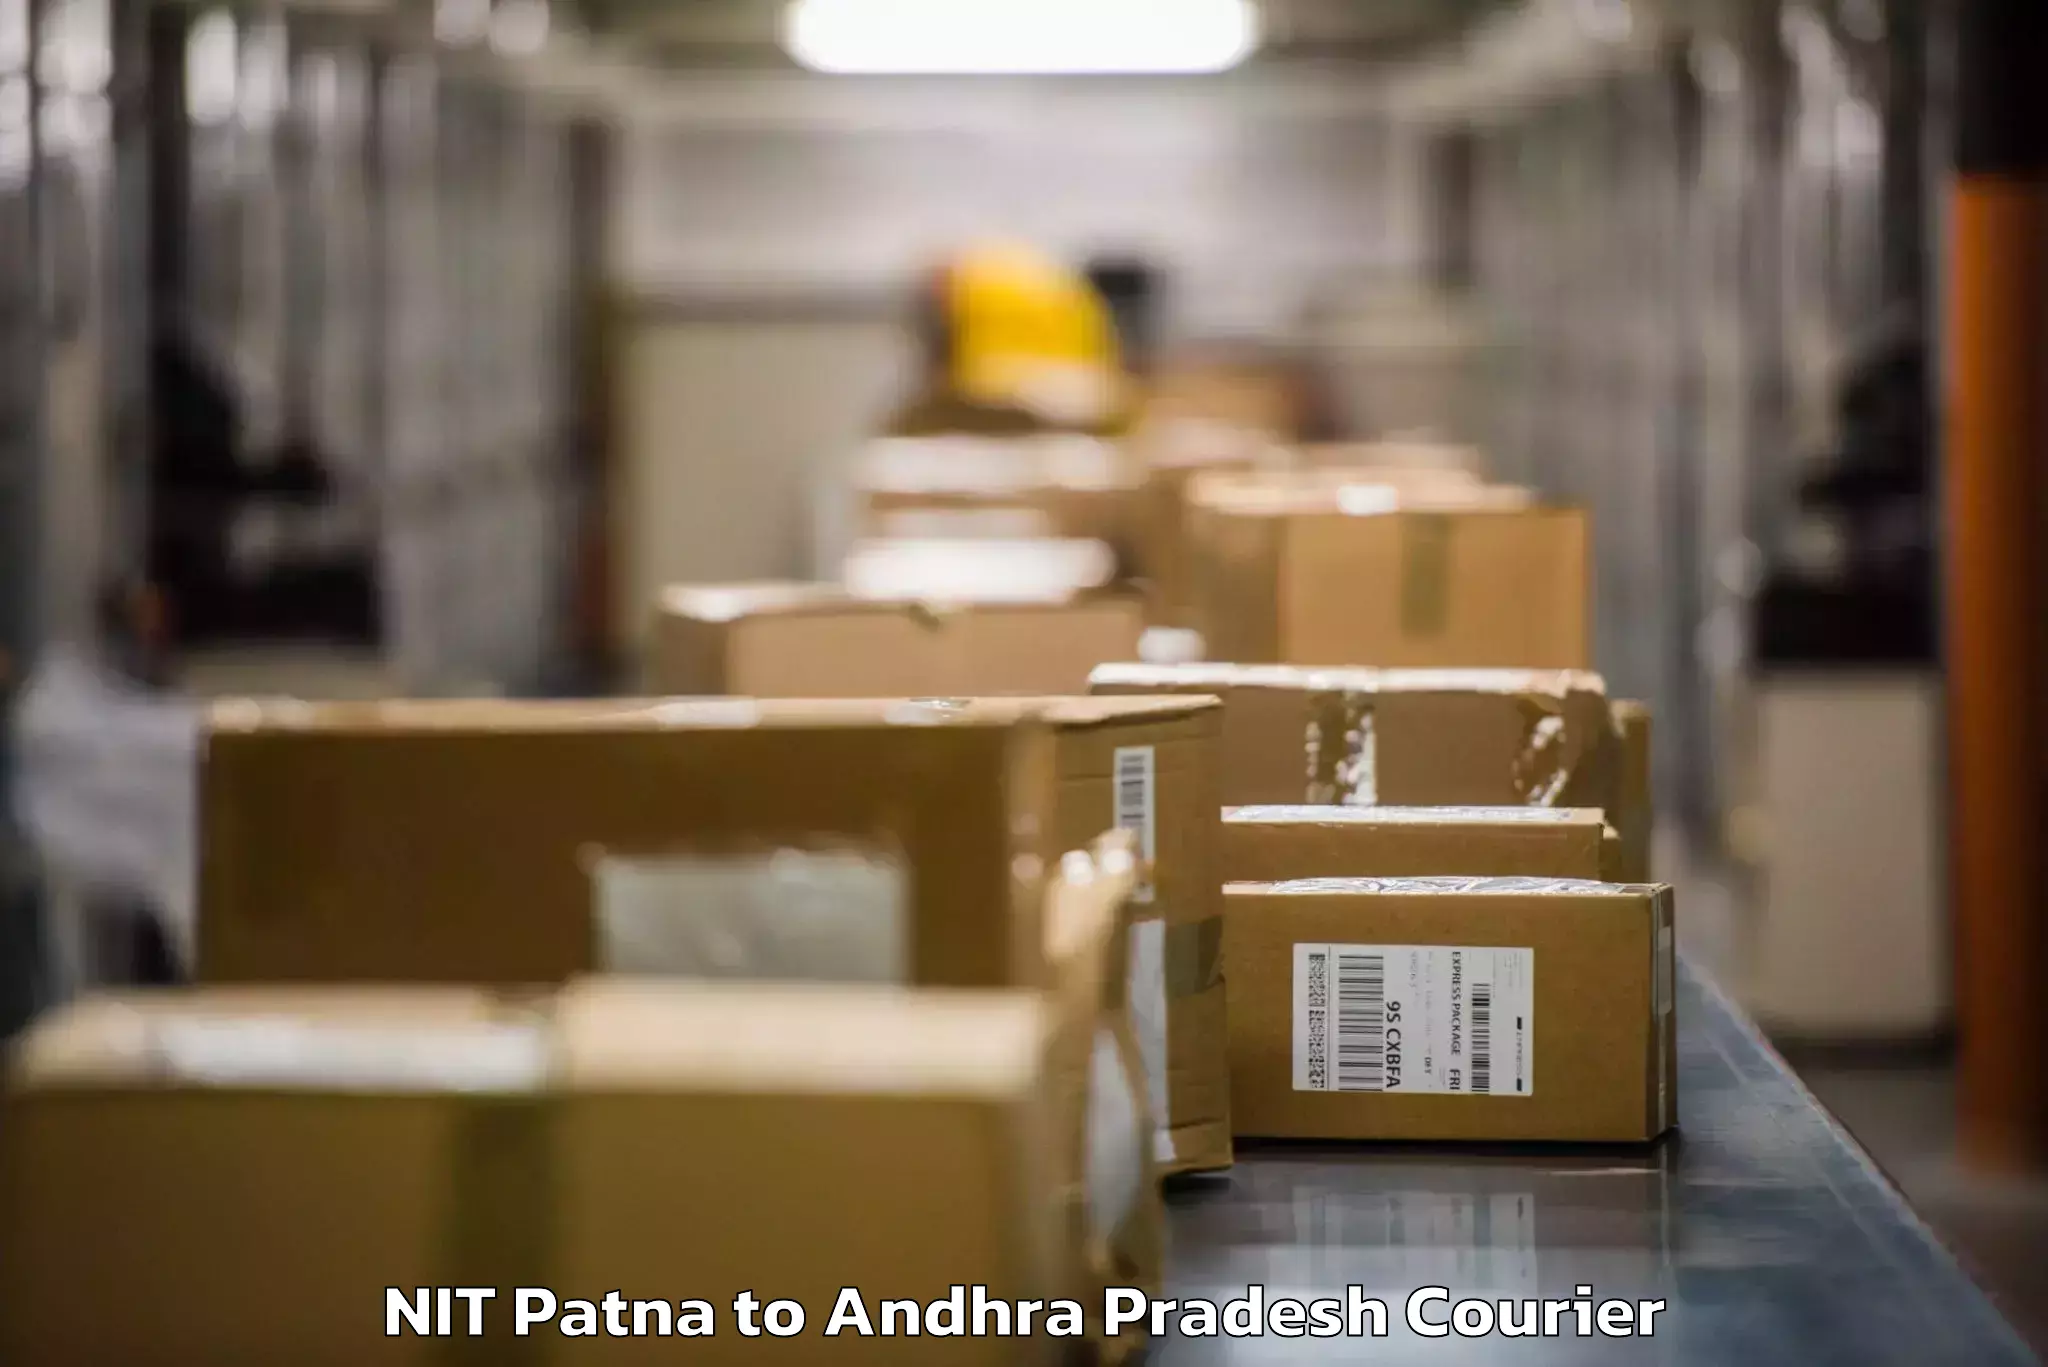 Luggage transport consultancy NIT Patna to Gampalagudem